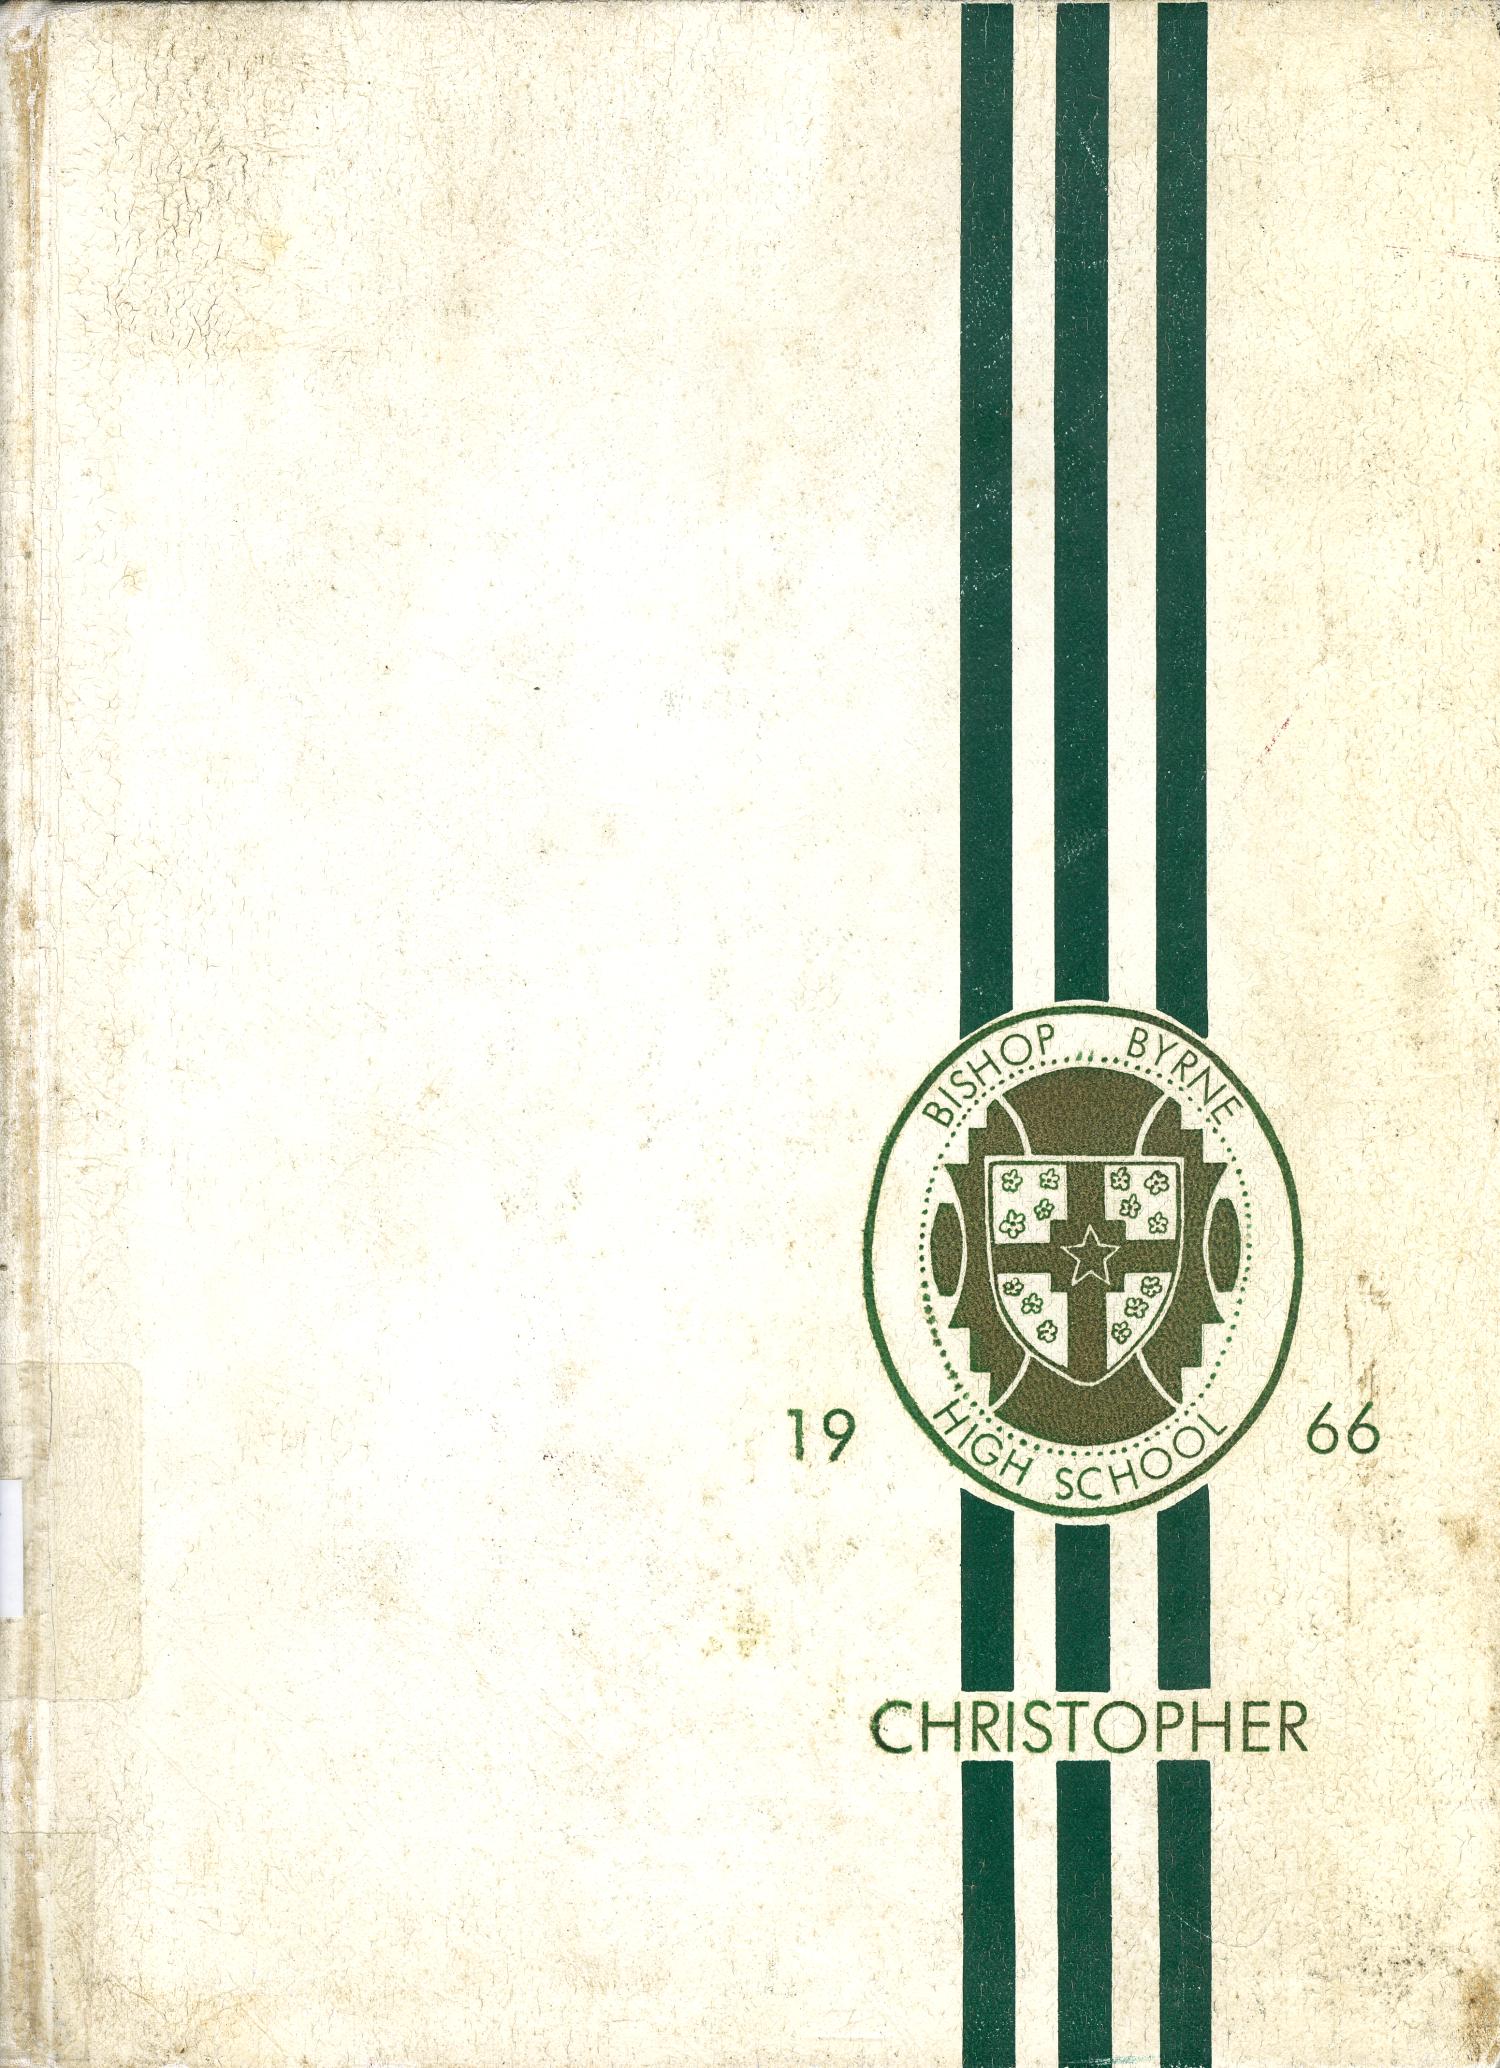 The Christopher, Yearbook of Bishop Byrne High School, 1966
                                                
                                                    Front Cover
                                                